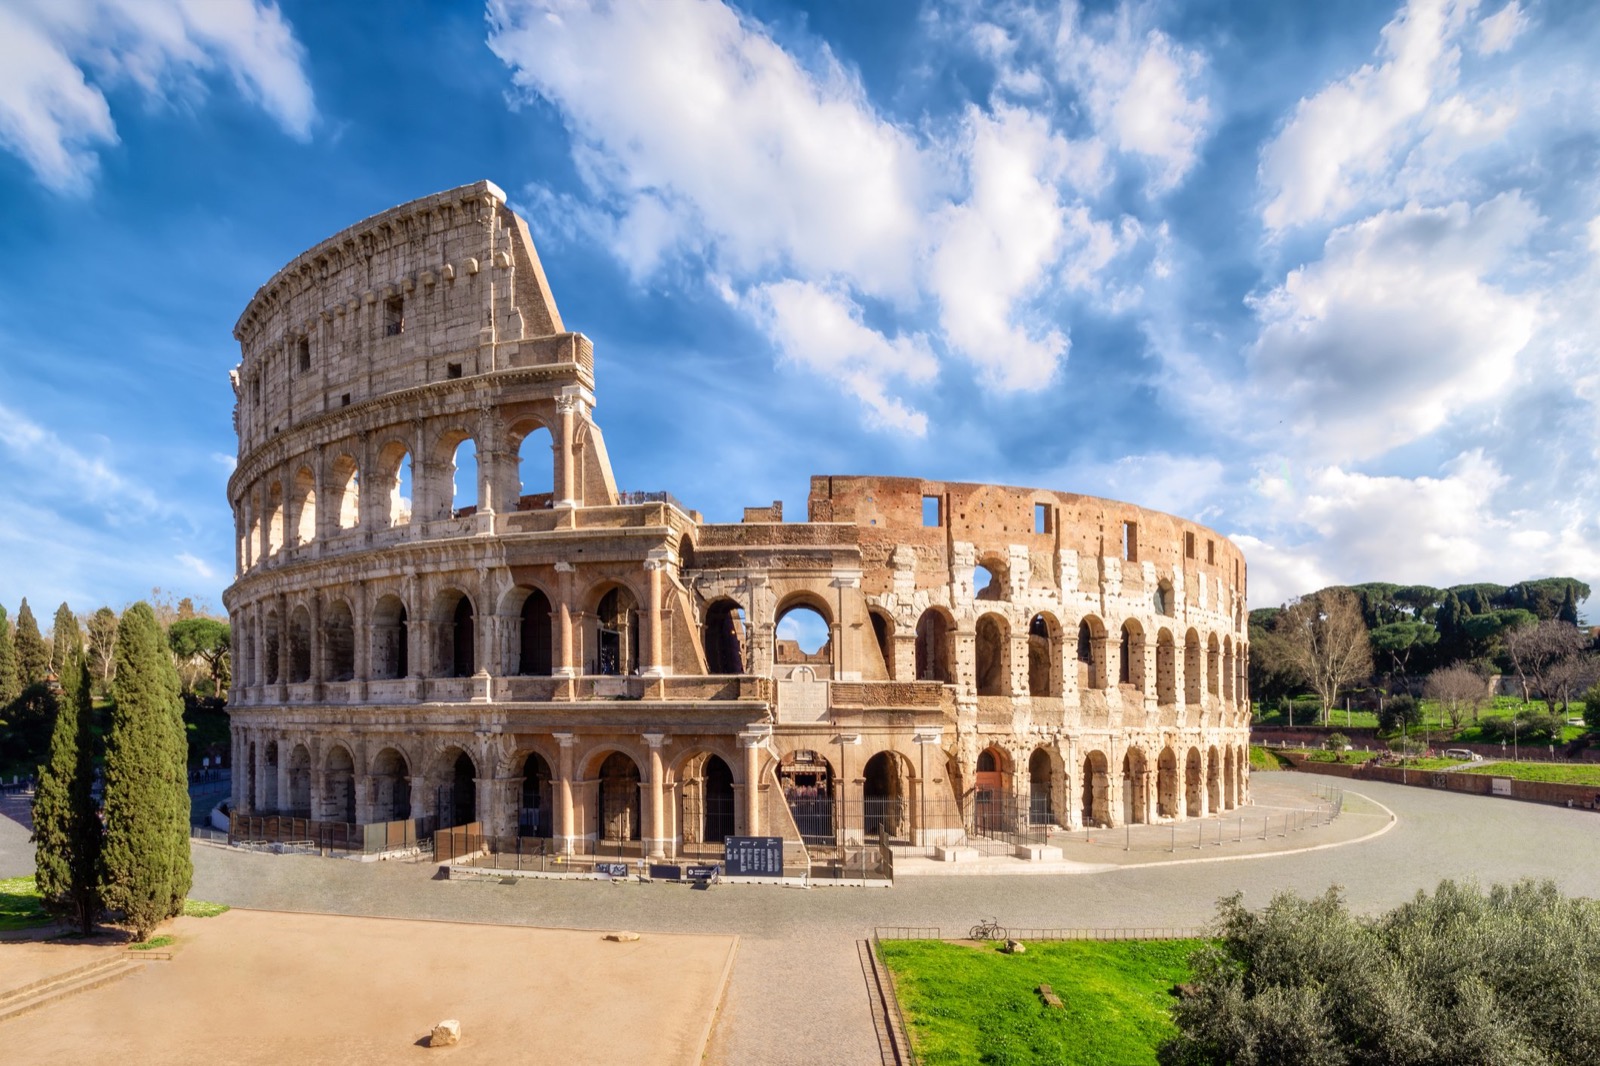 Can You Pass This 40-Question Geography Test That Gets Progressively Harder With Each Question? Colosseum, Rome, Italy